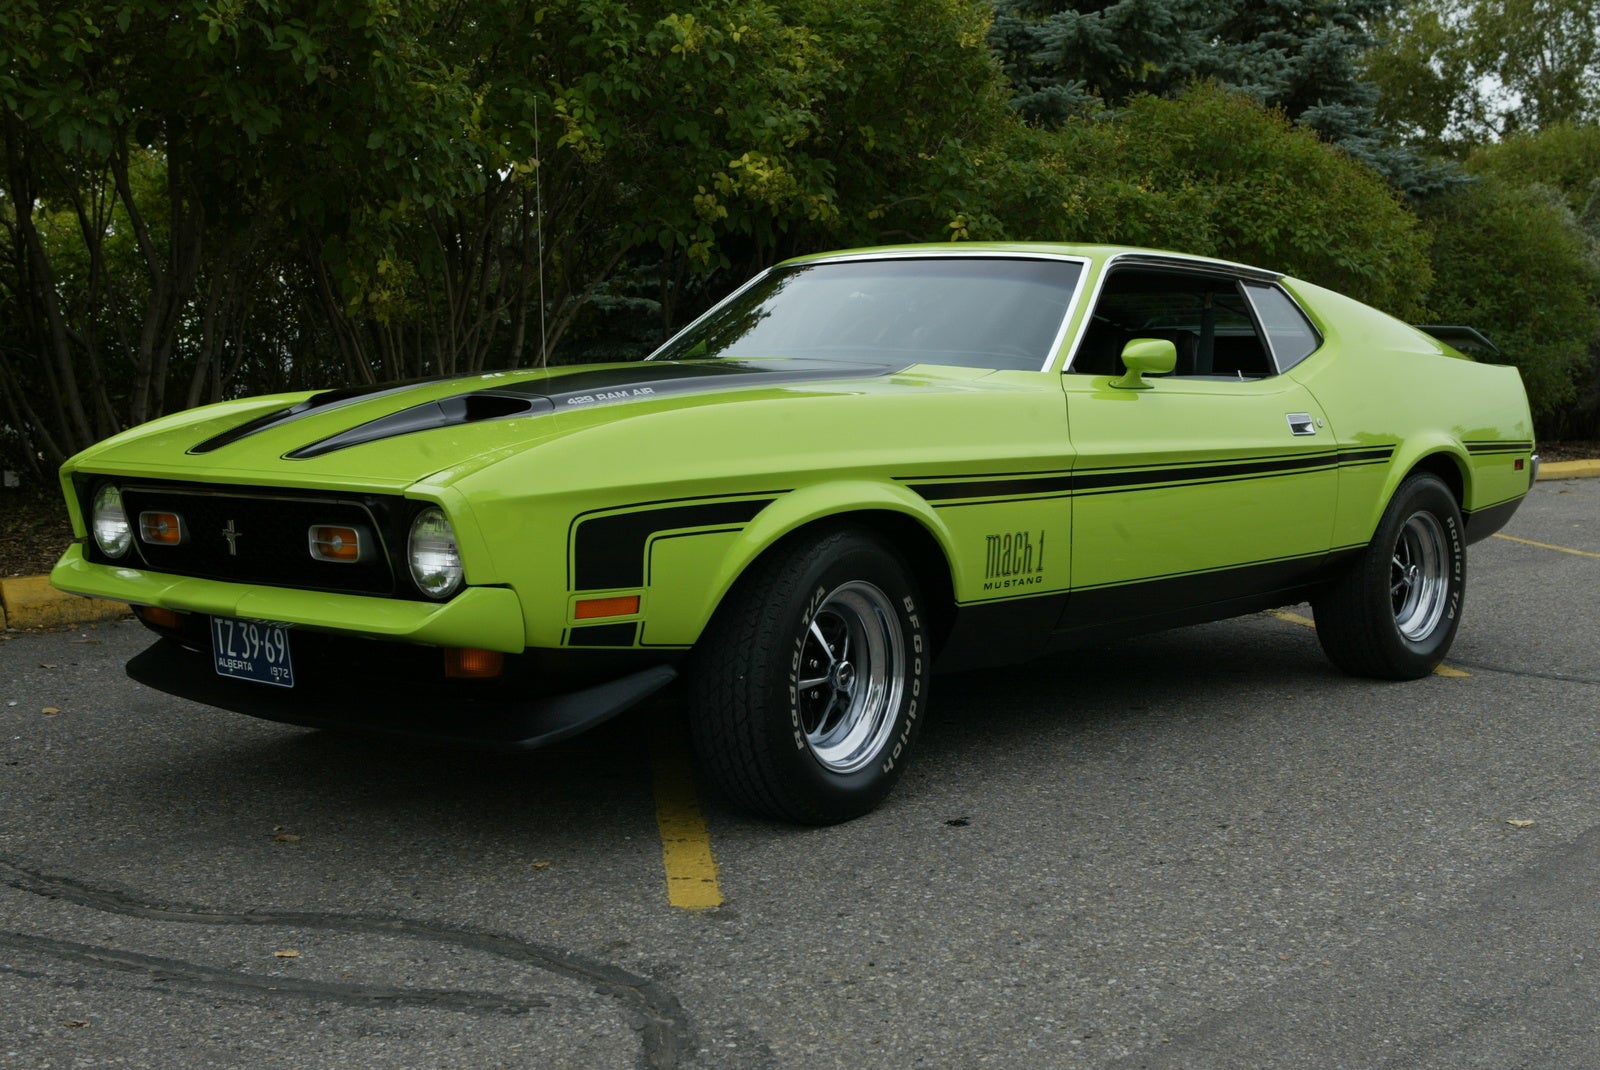 1972 Ford Mustang Mach 1 picture, exterior